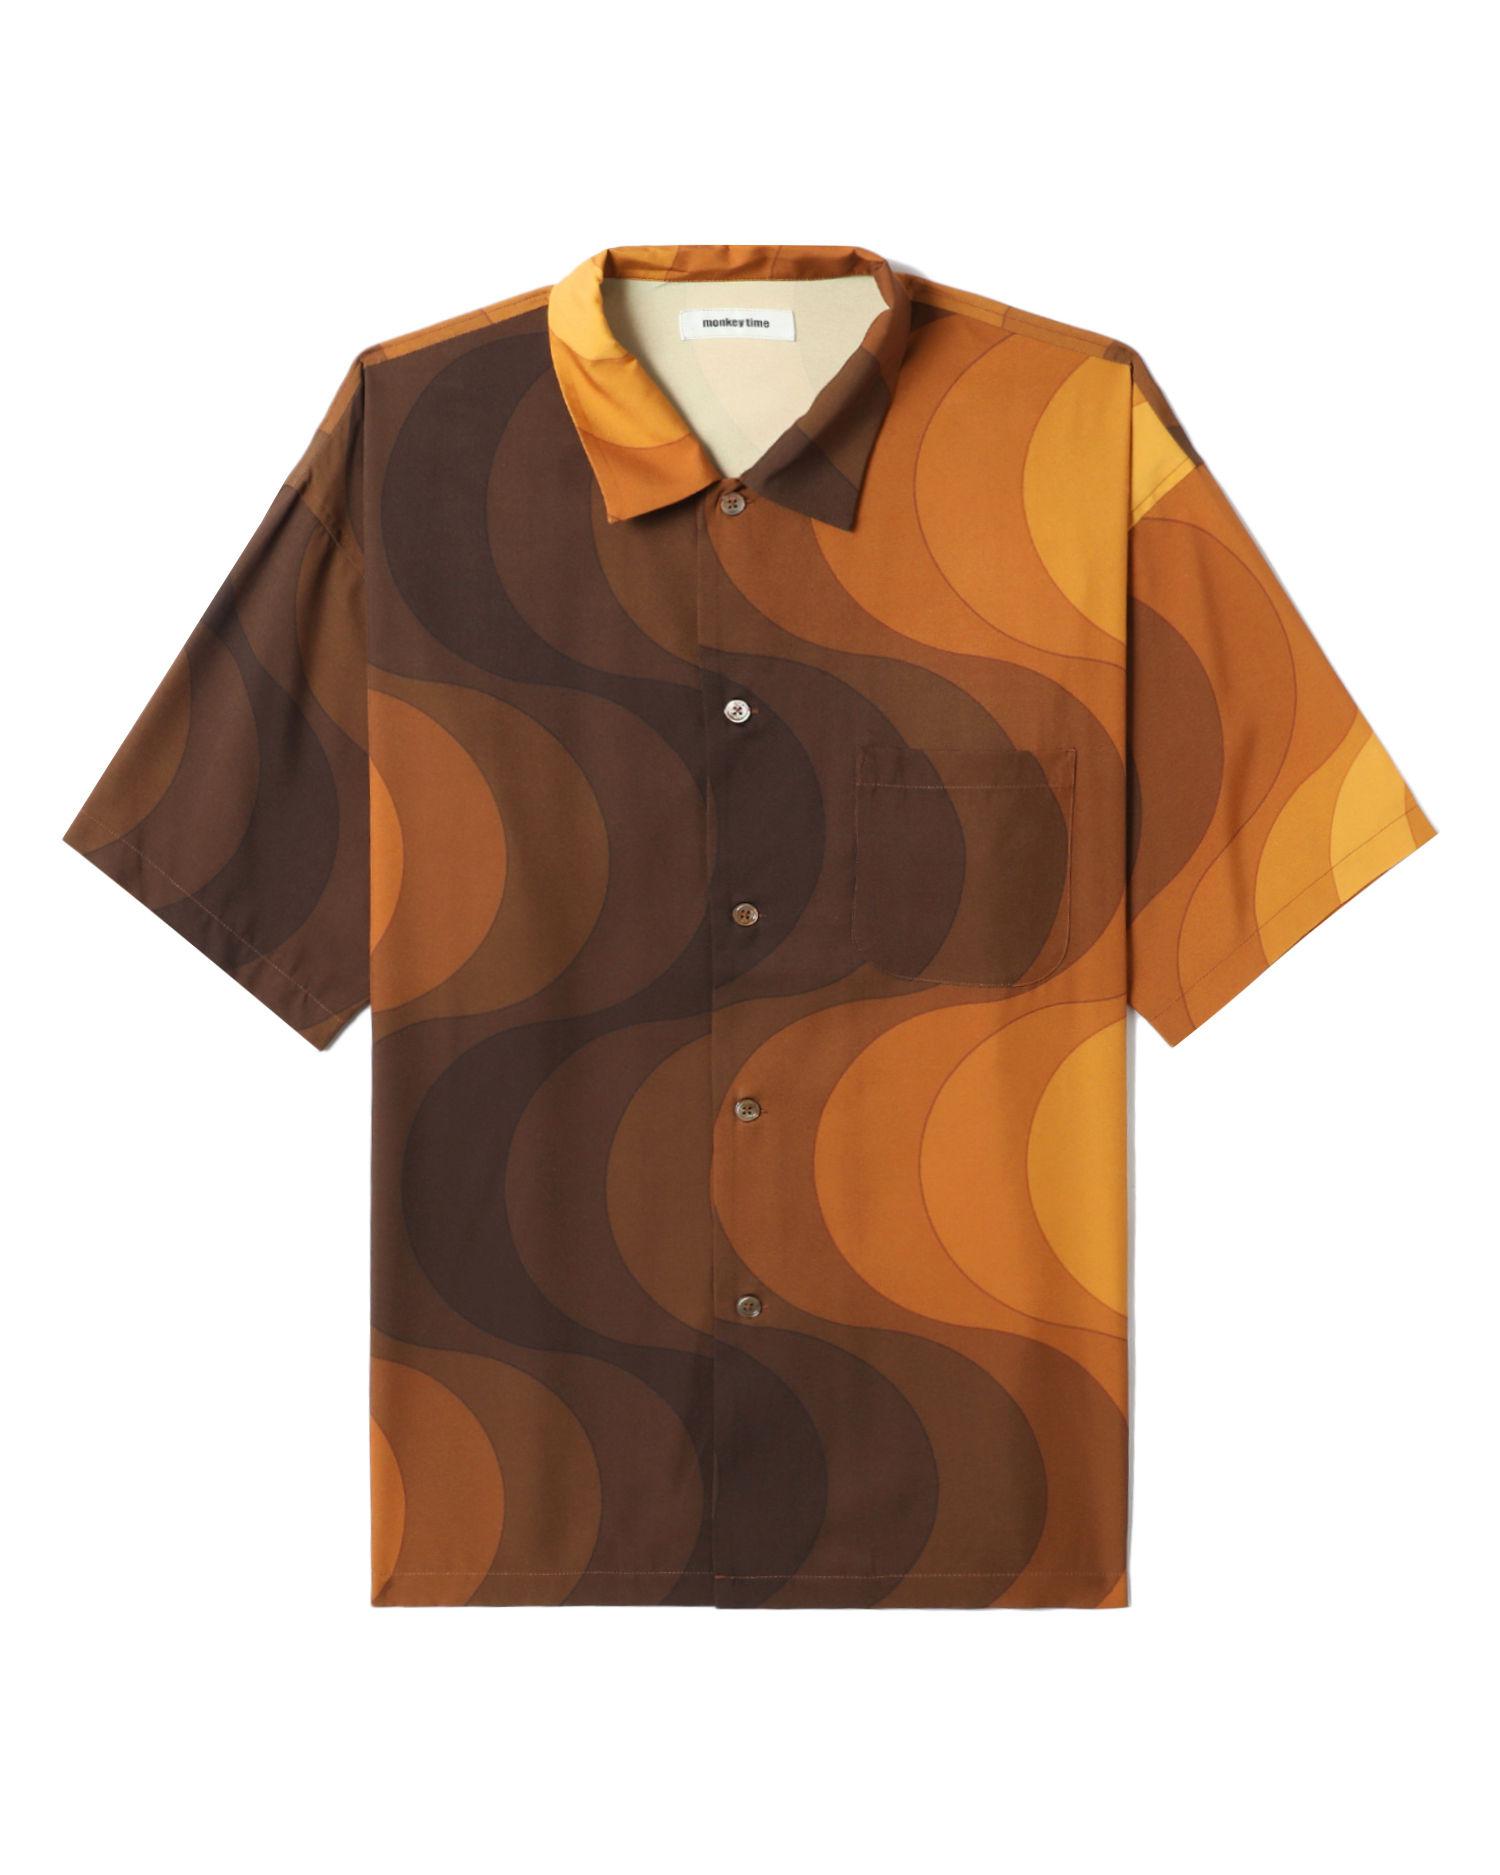 Gradient short sleeve shirt by BEAUTY&YOUTH MONKEY TIME